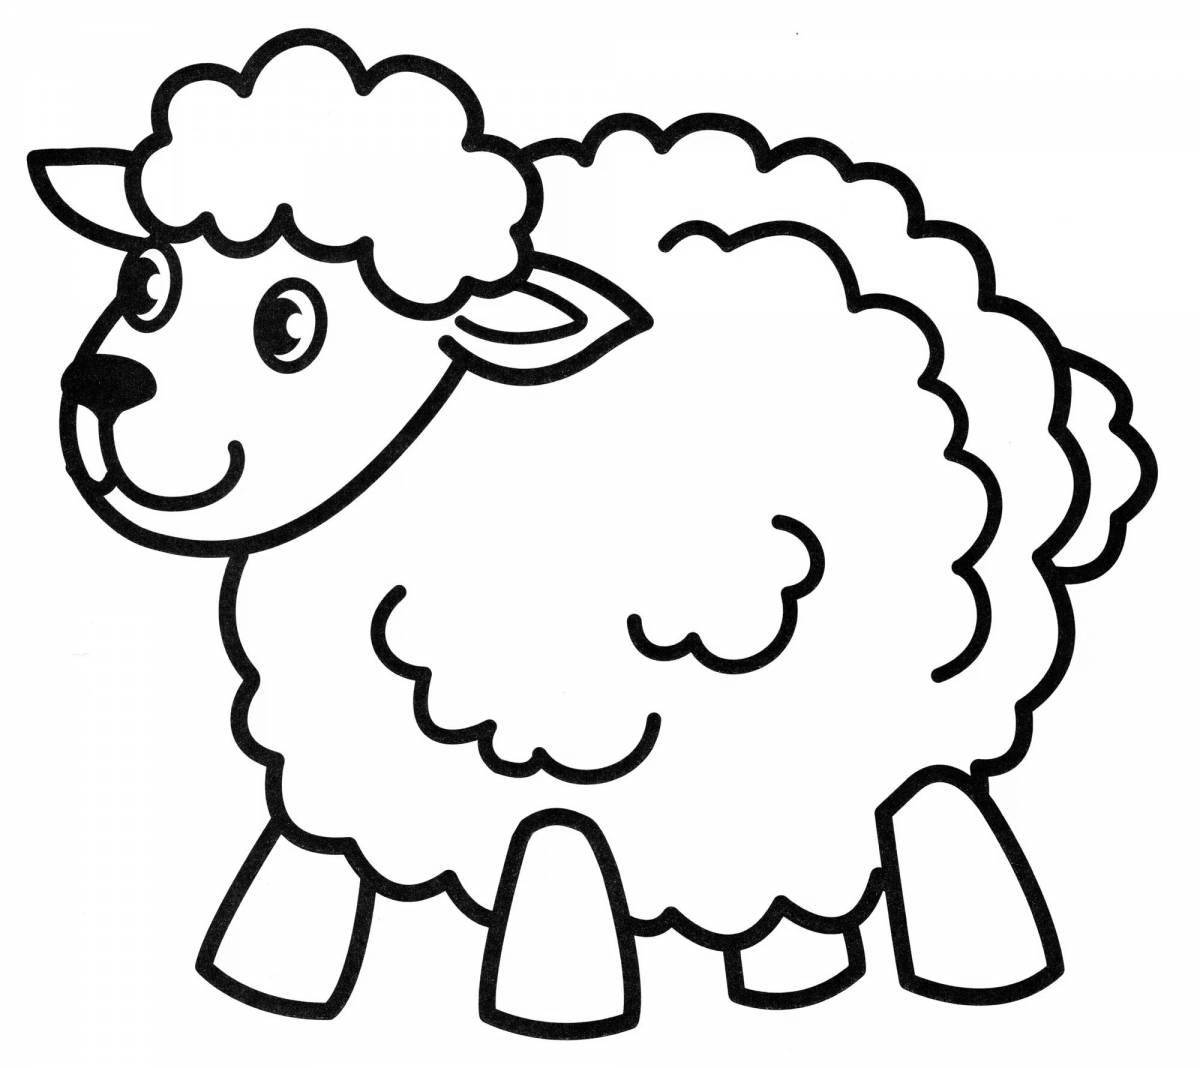 Sheep for children 4 5 years old #3